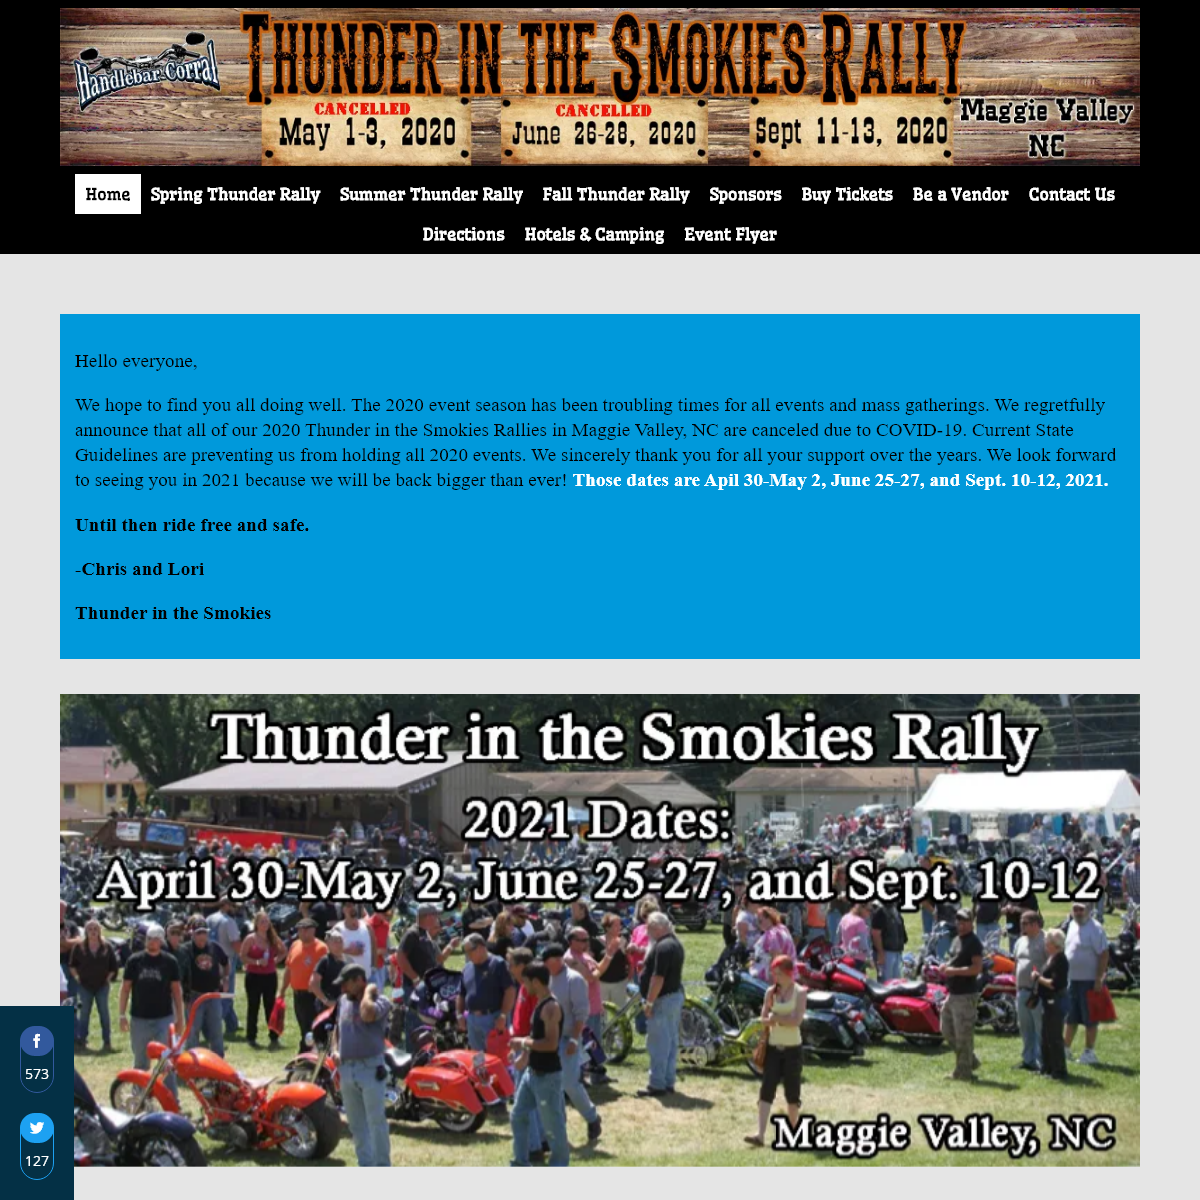 A complete backup of thunderinthesmokys.com